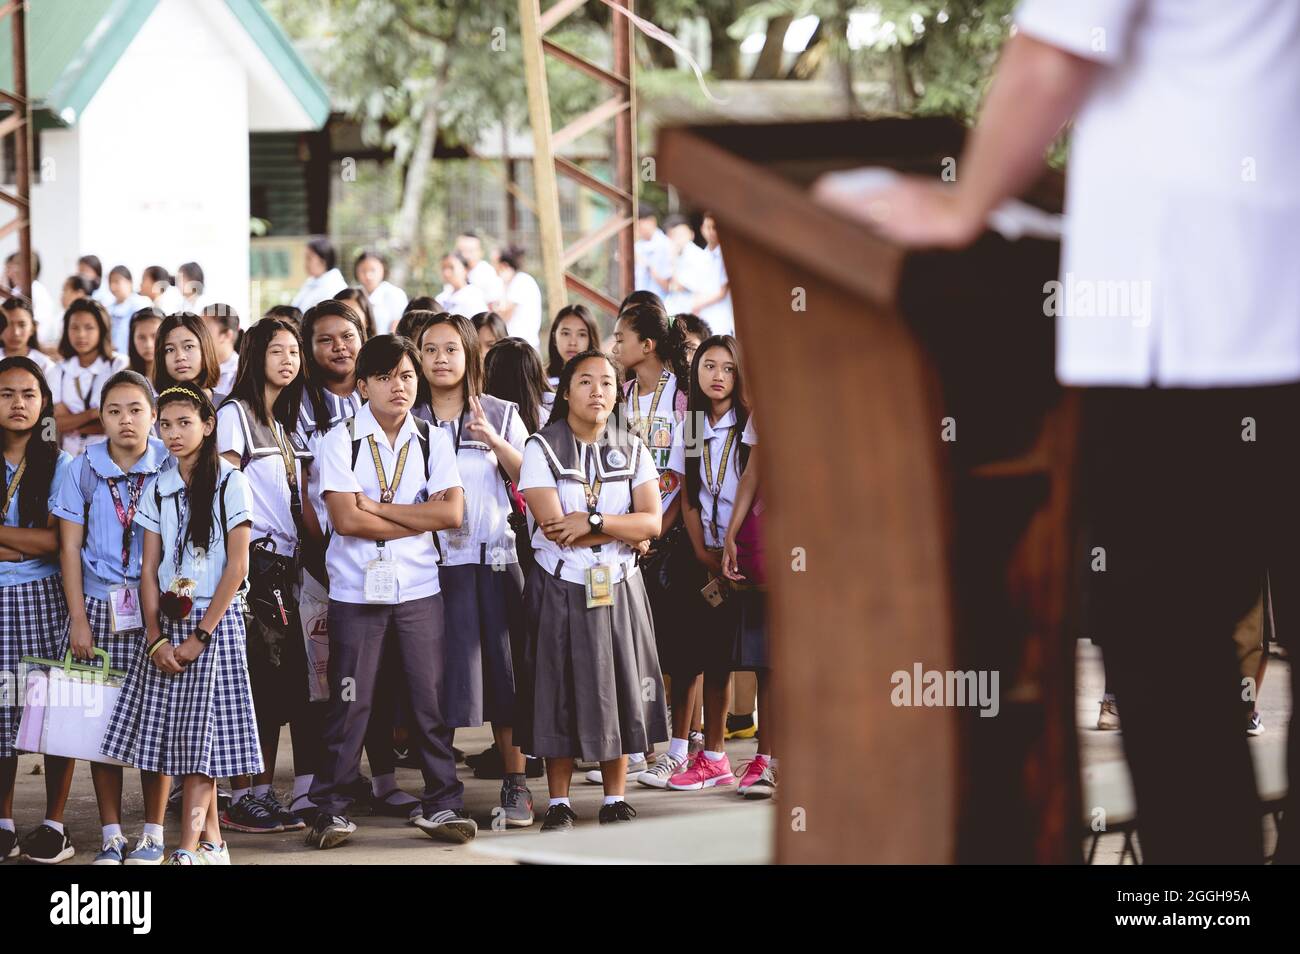 BACOLOD, PHILIPPINES - Mar 01, 2019: A group of Filipino high school students gathering for a corporate speech Stock Photo